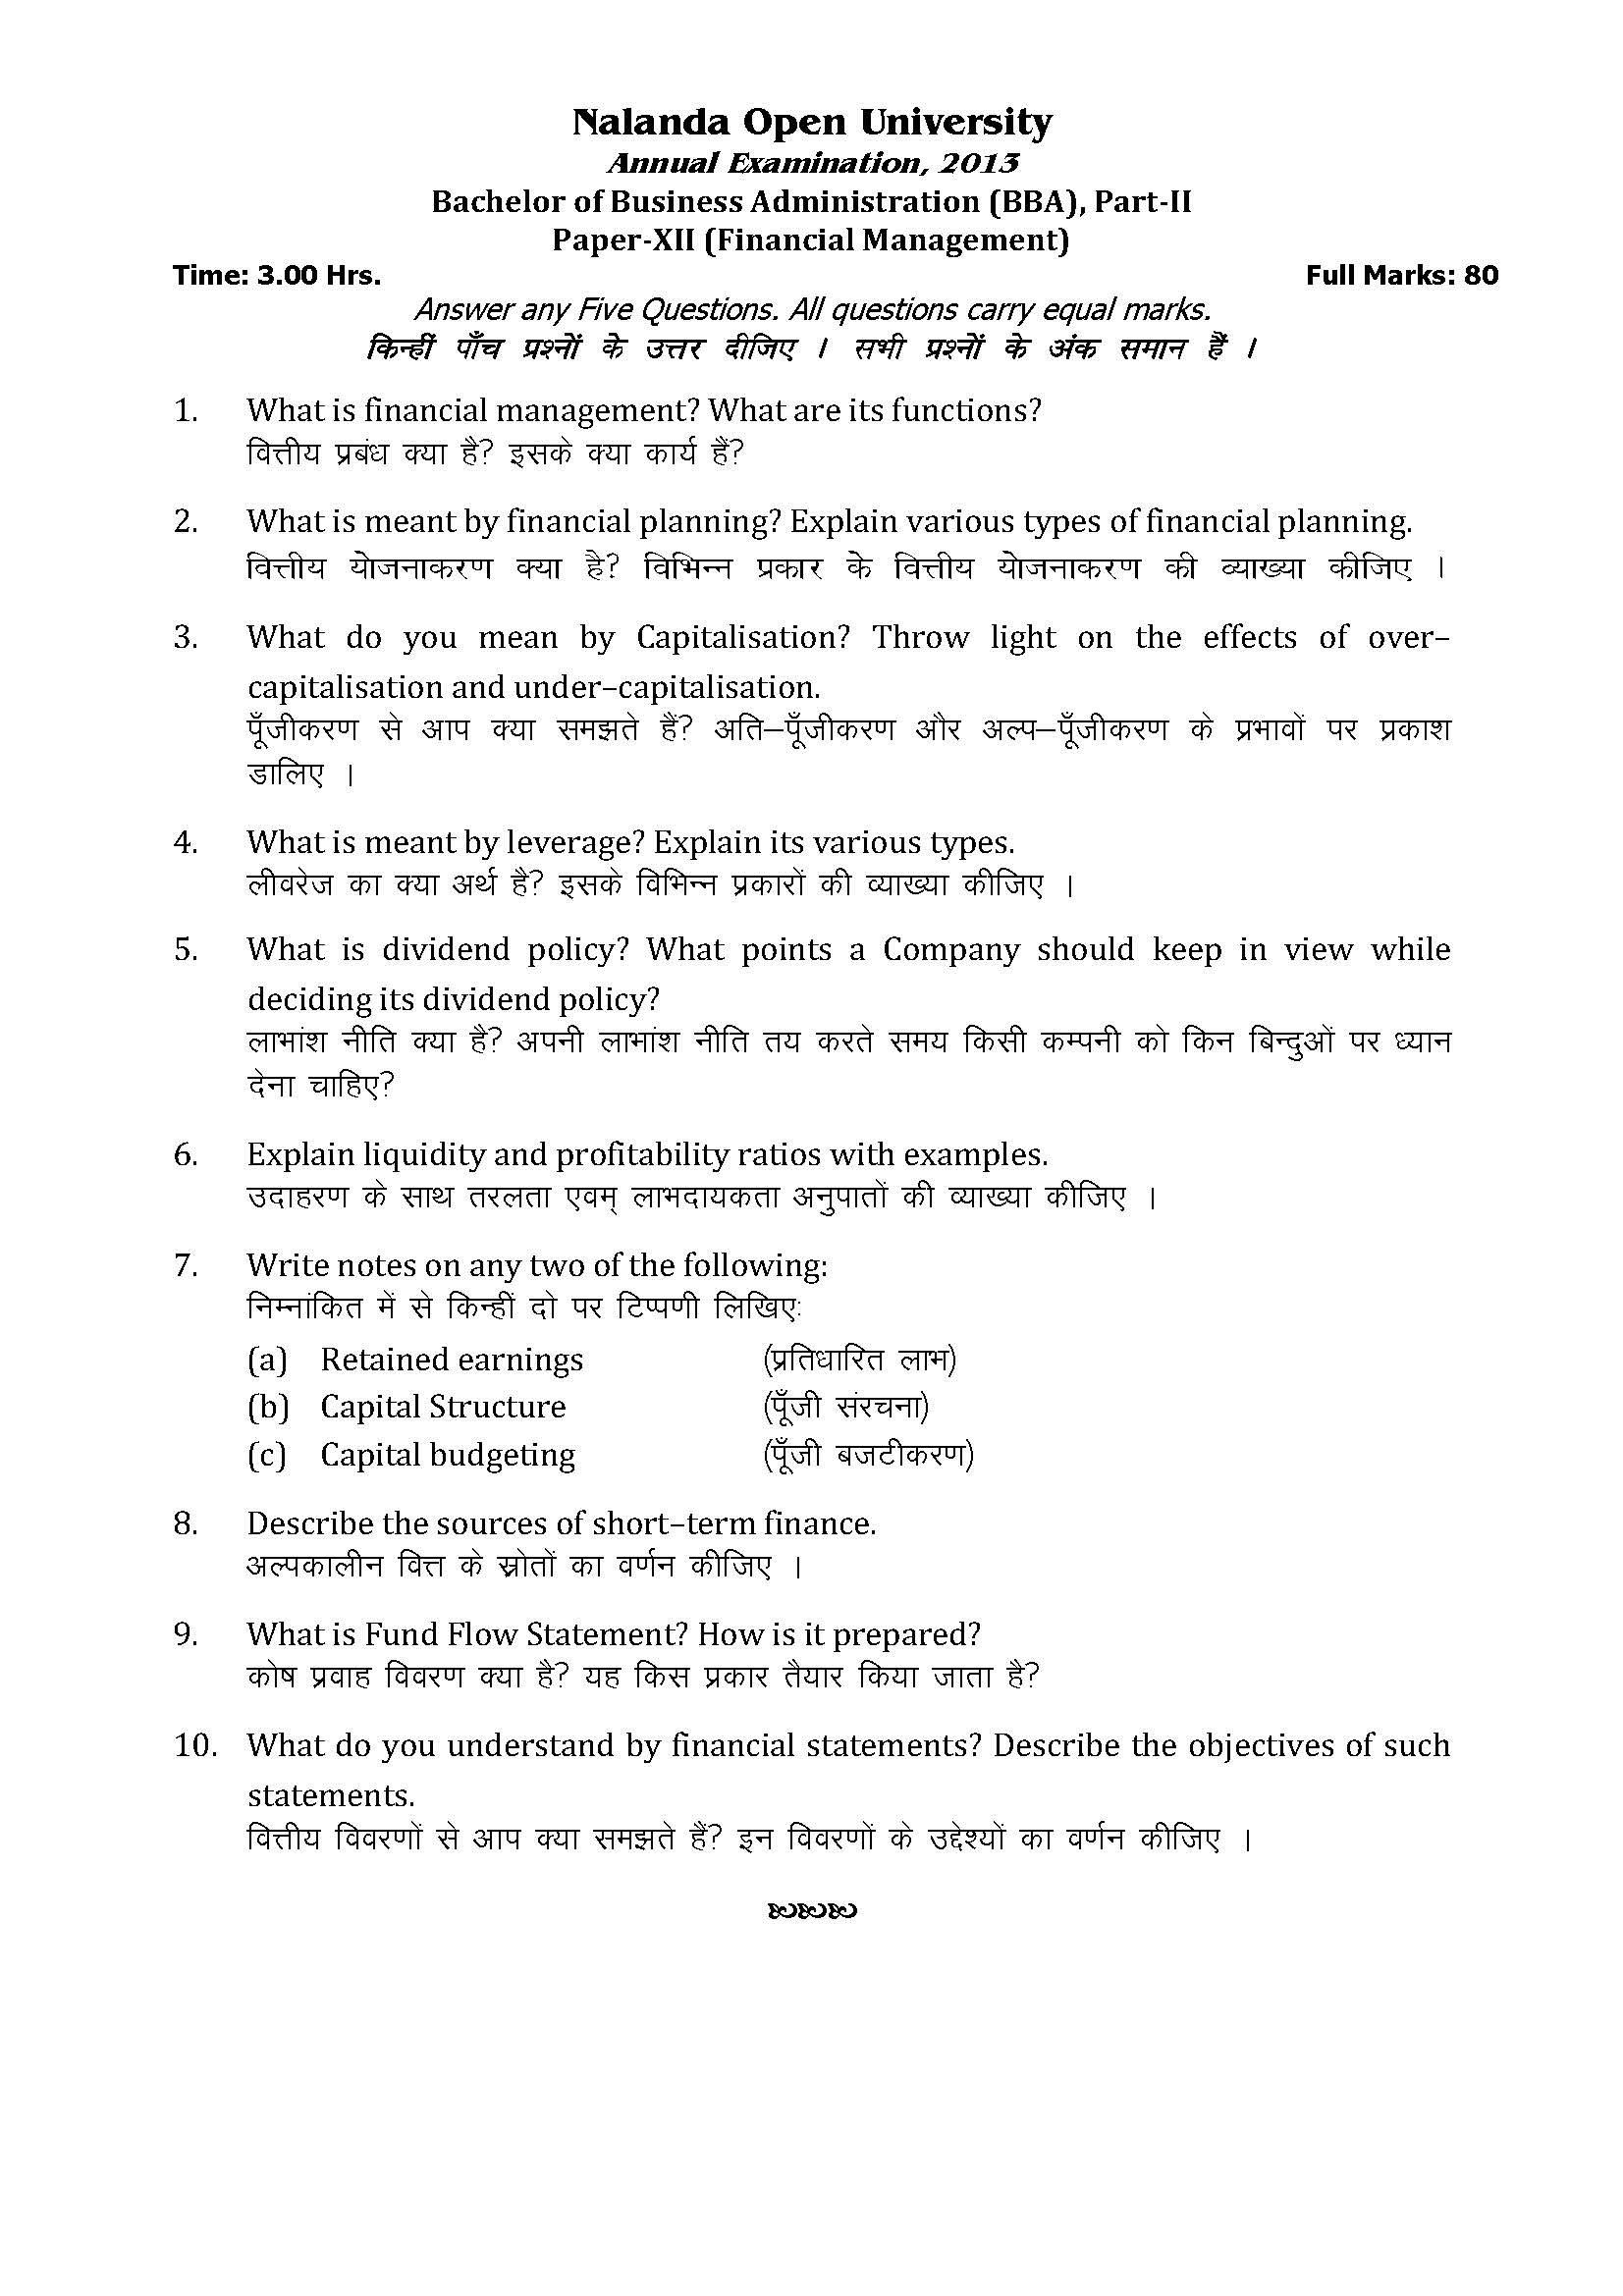 bba-financial-management-question-papers-entrance-india